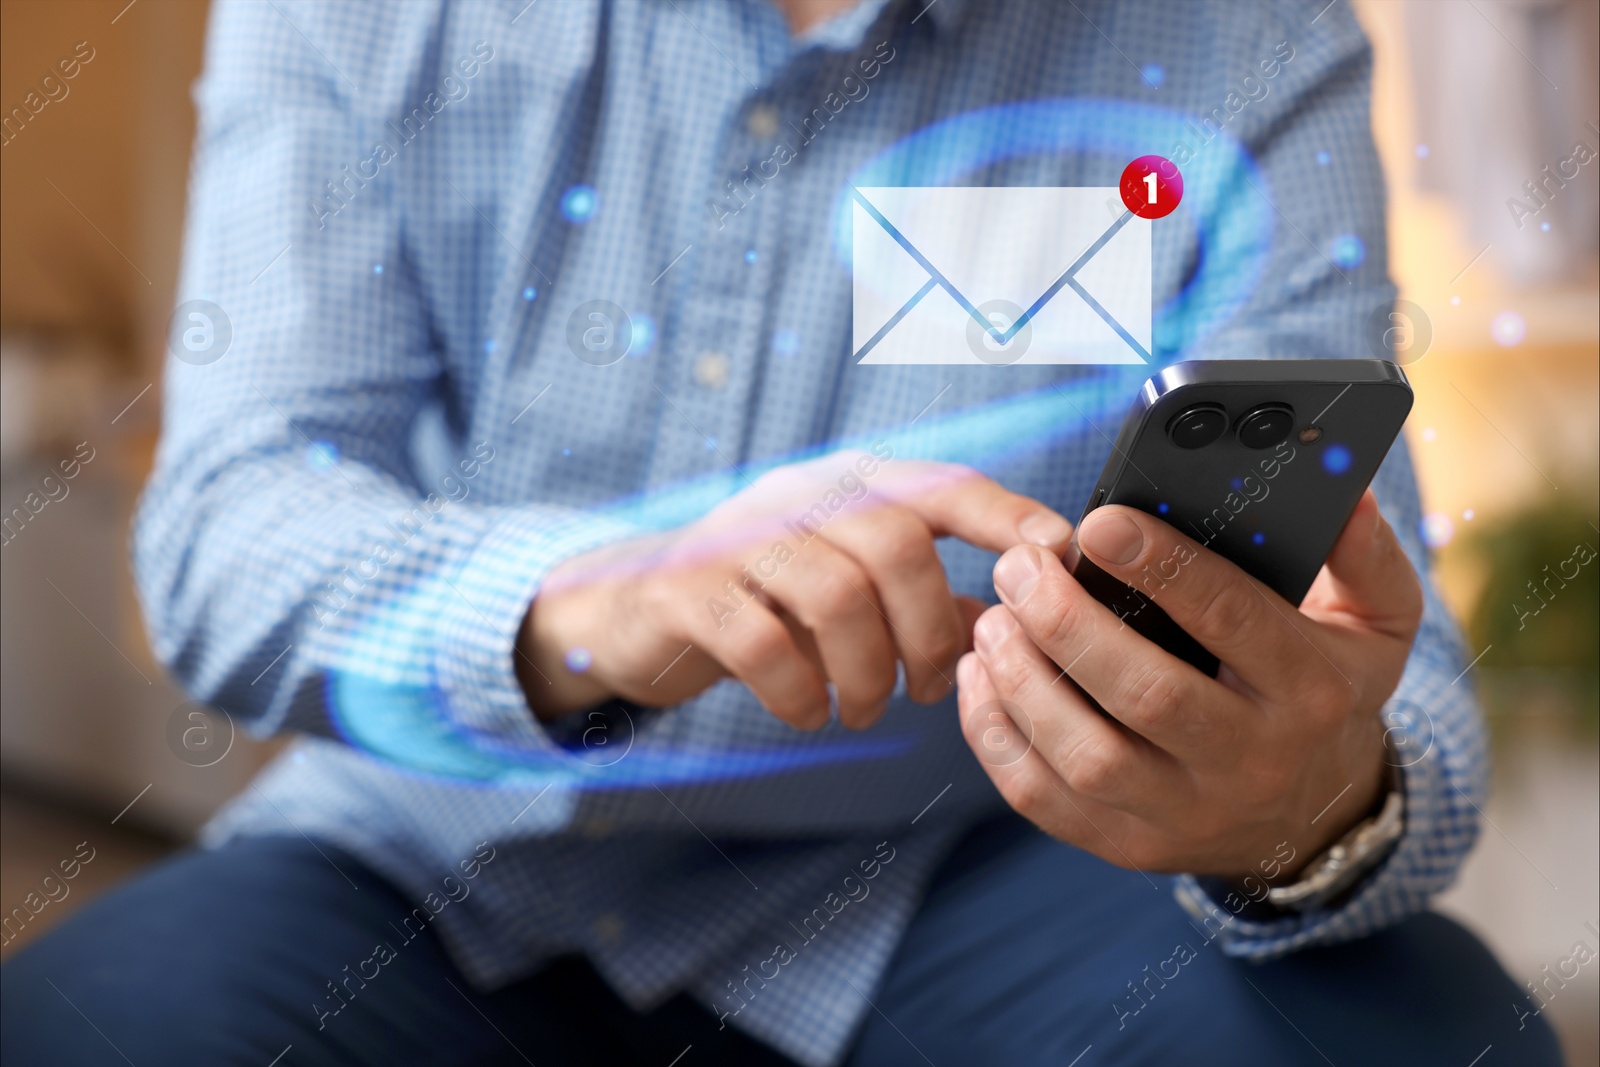 Image of Email. Man using mobile phone, closeup. Letter illustration over device